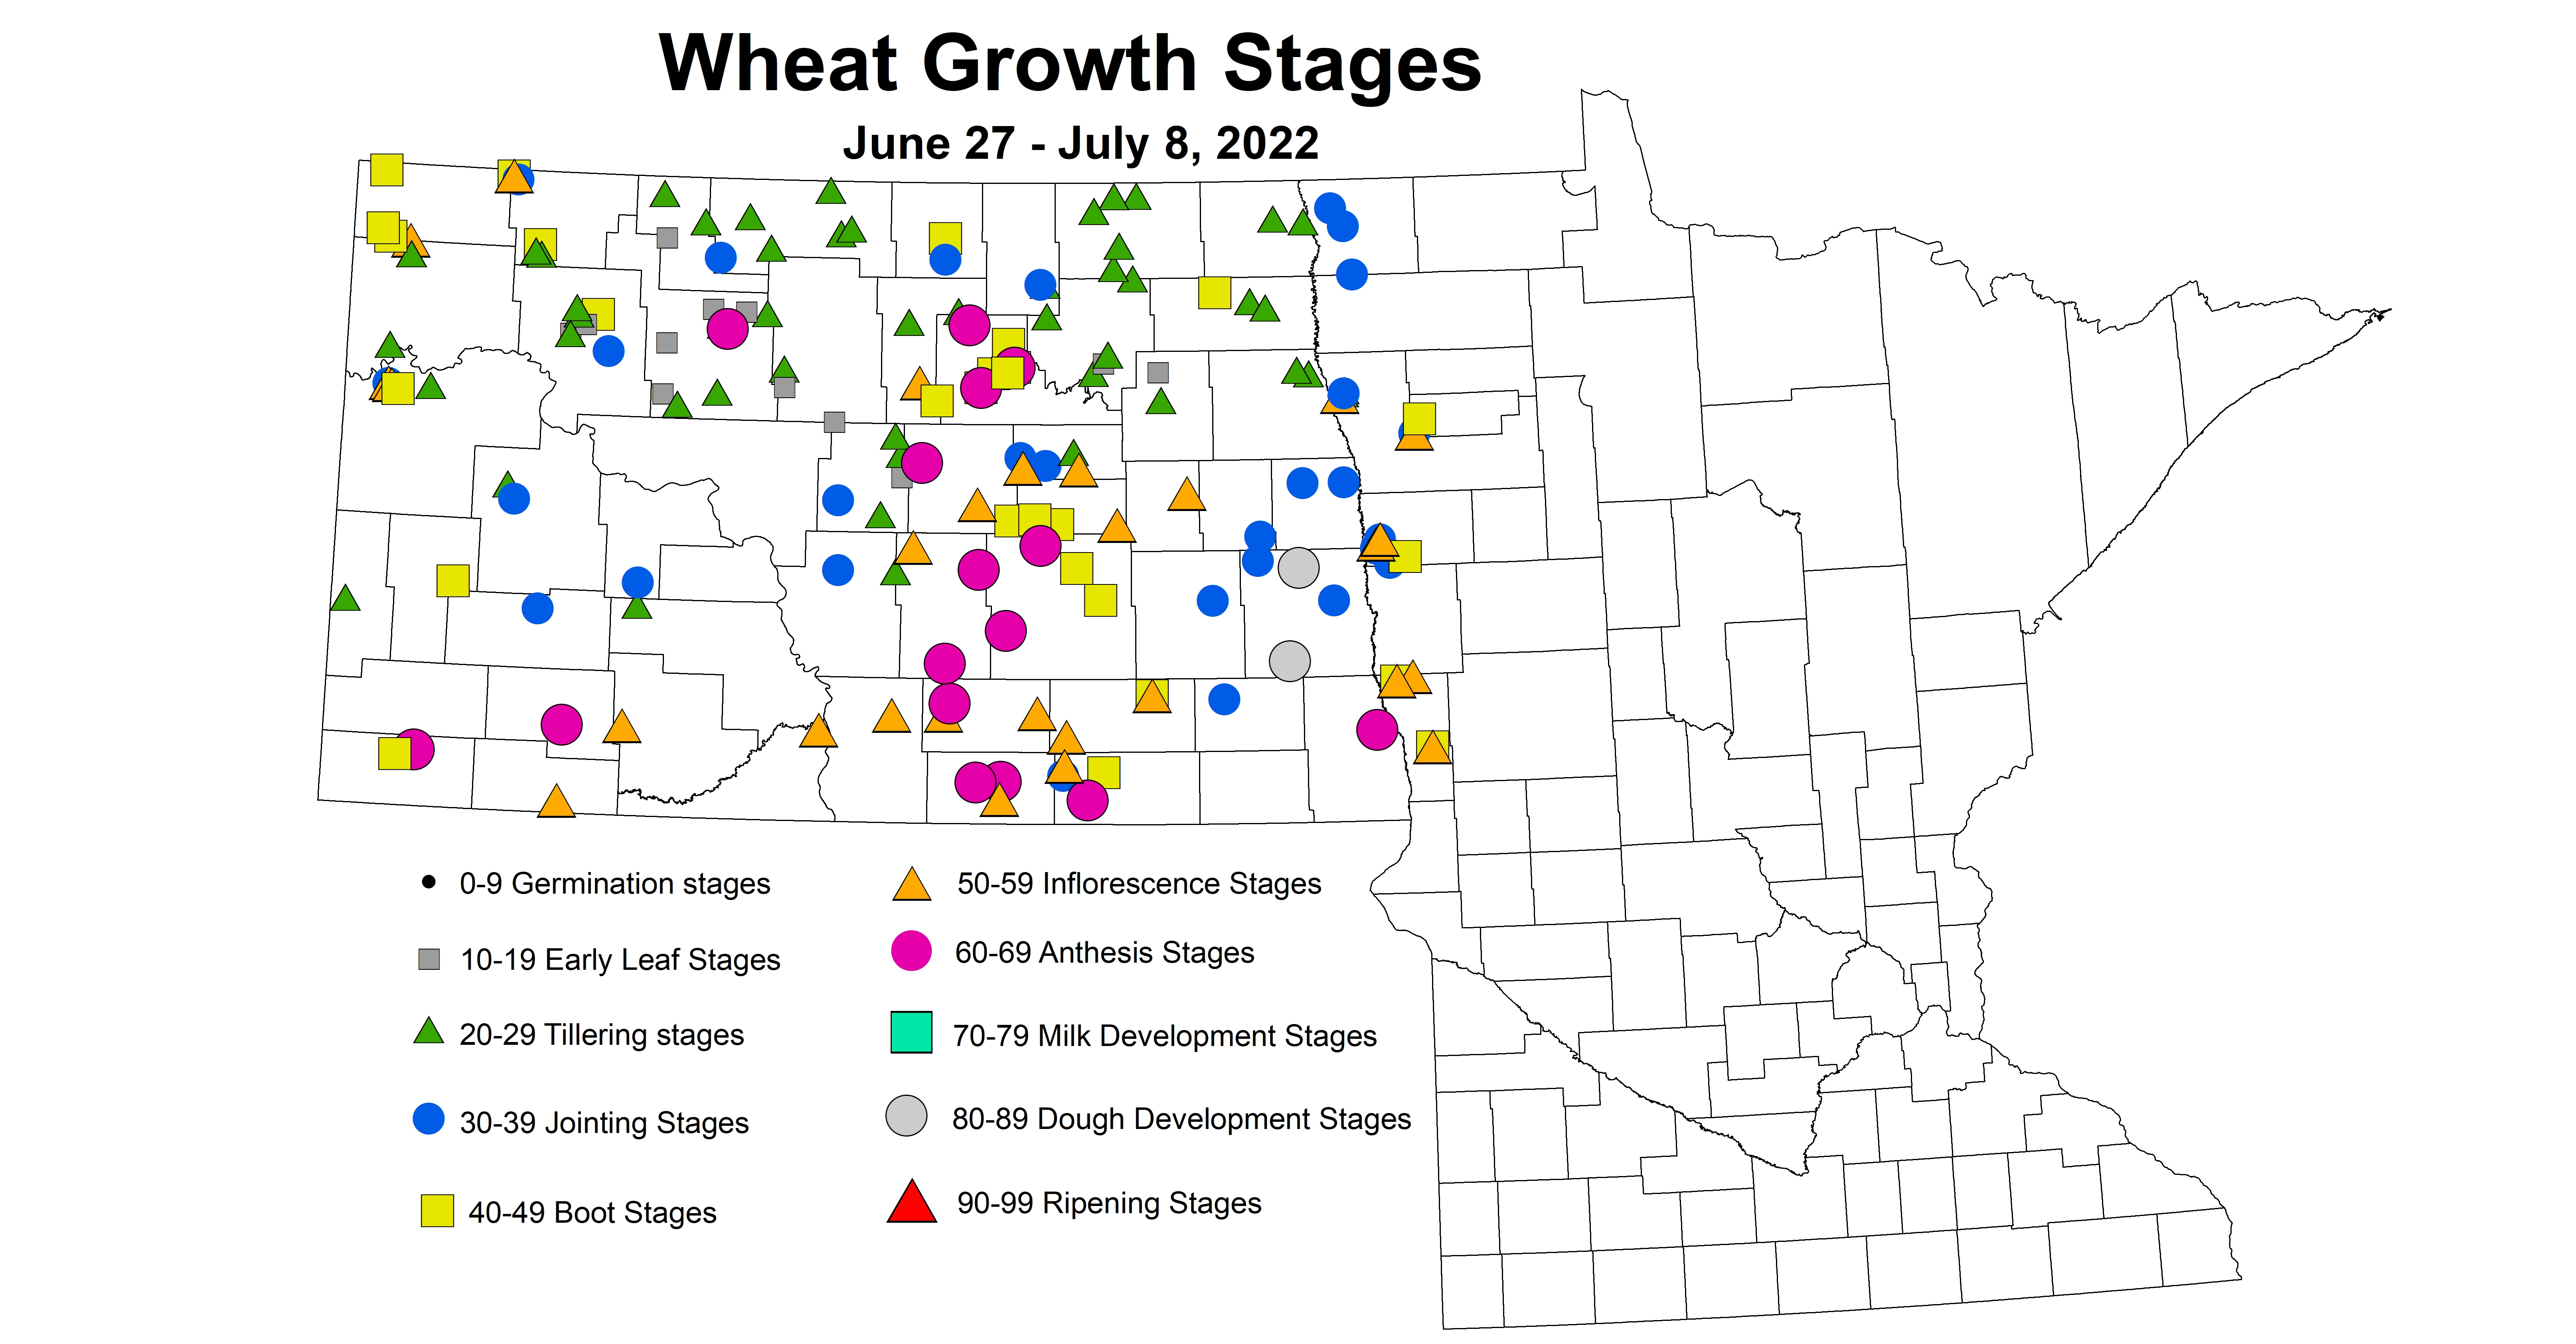 ND IPM map of wheat growth stages June 27 to July 8, 2022